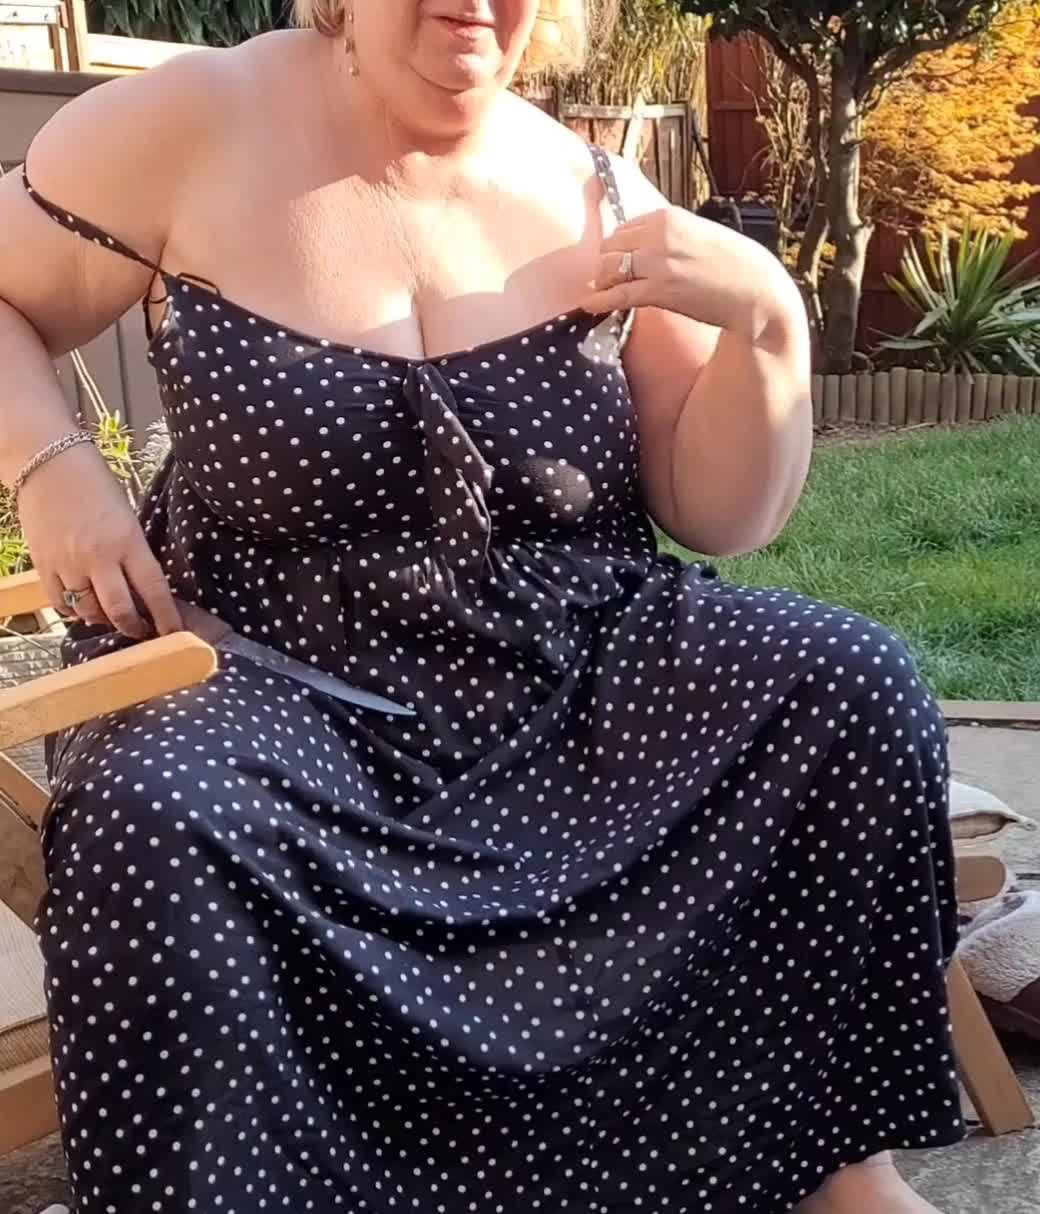 the Wife's  tits